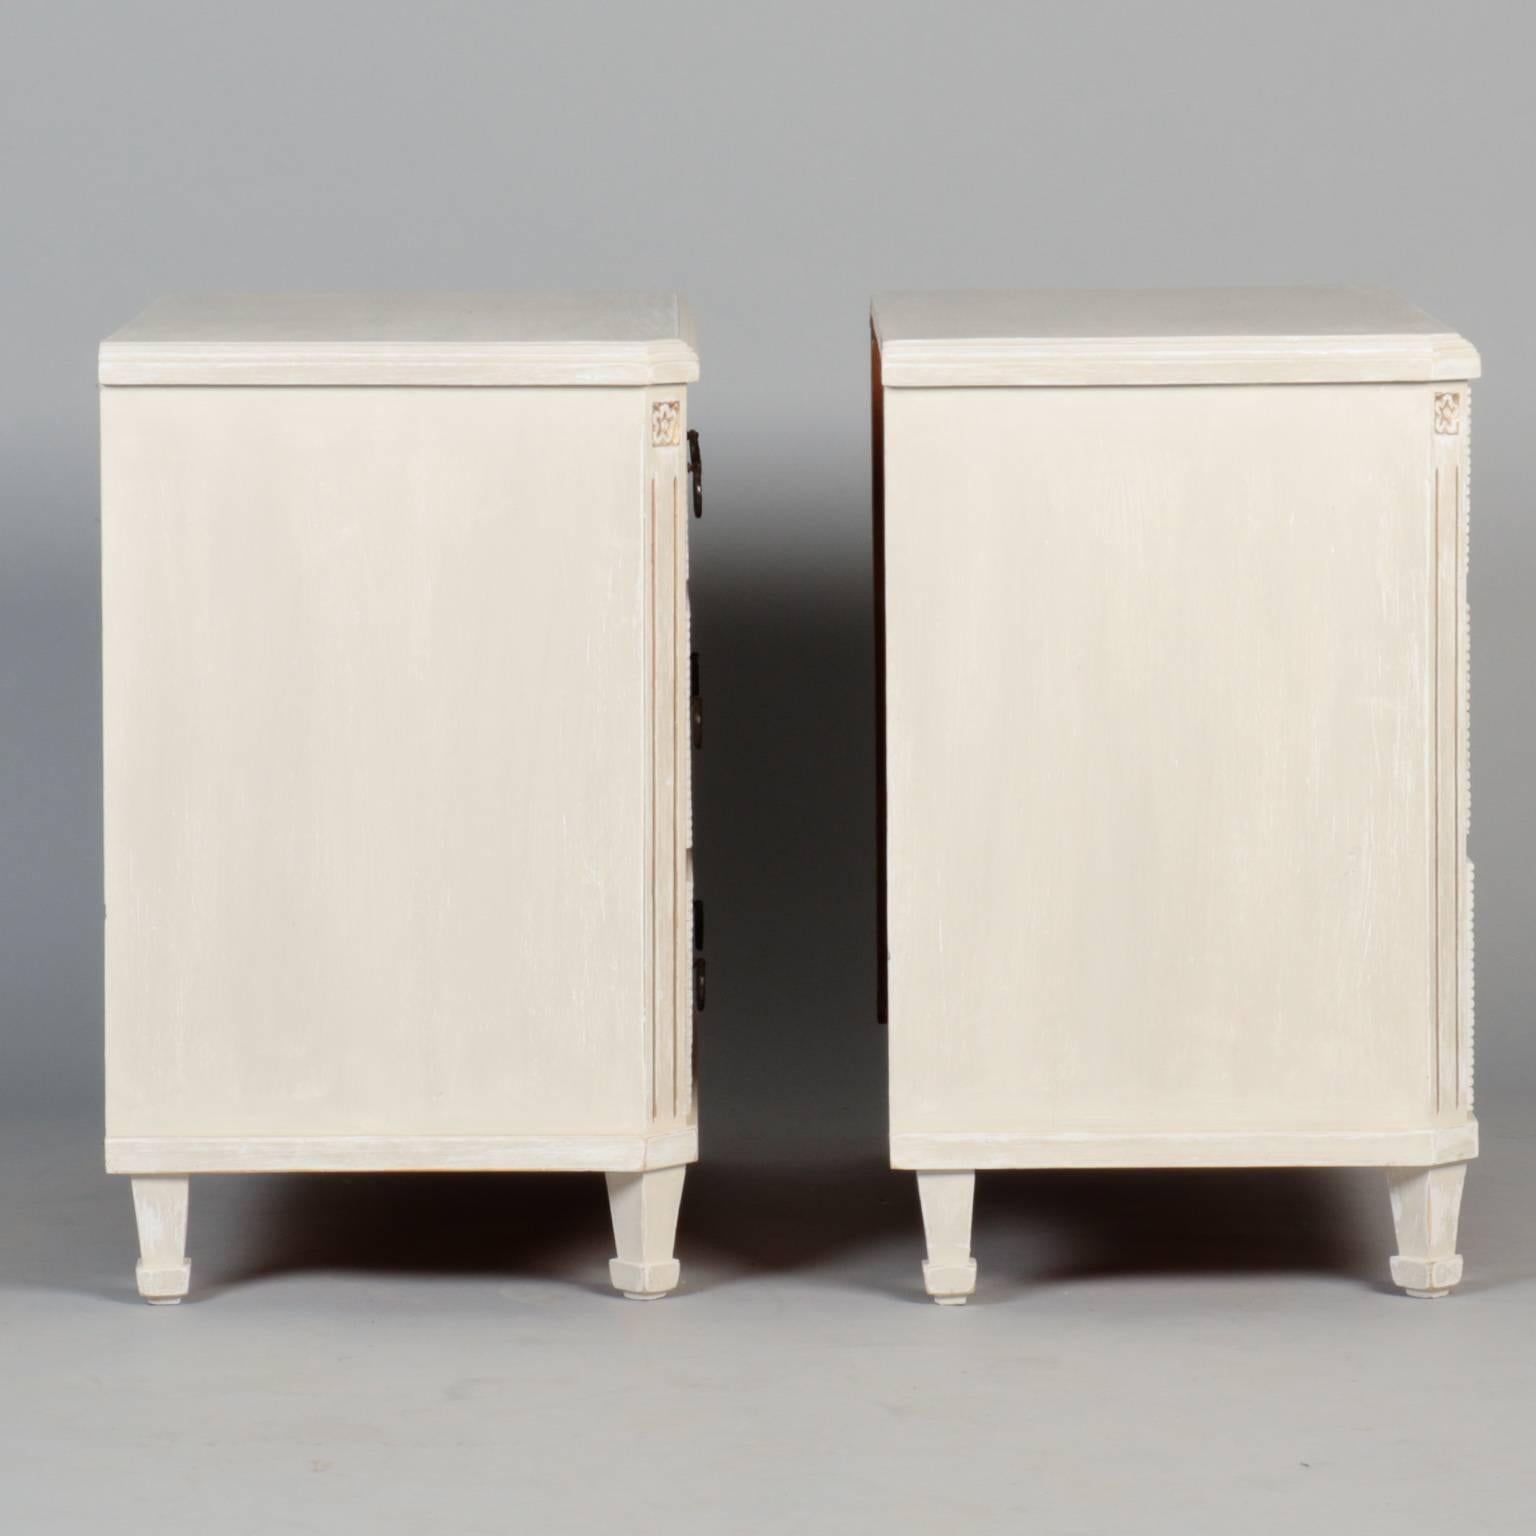 Pair of circa 1930s pair of three-drawer Swedish chests with antique white painted finish. Found in England, these chests have ribbed drawer fronts, decorative carved floral details at the top sides and brass hardware. Versatile size can be used as